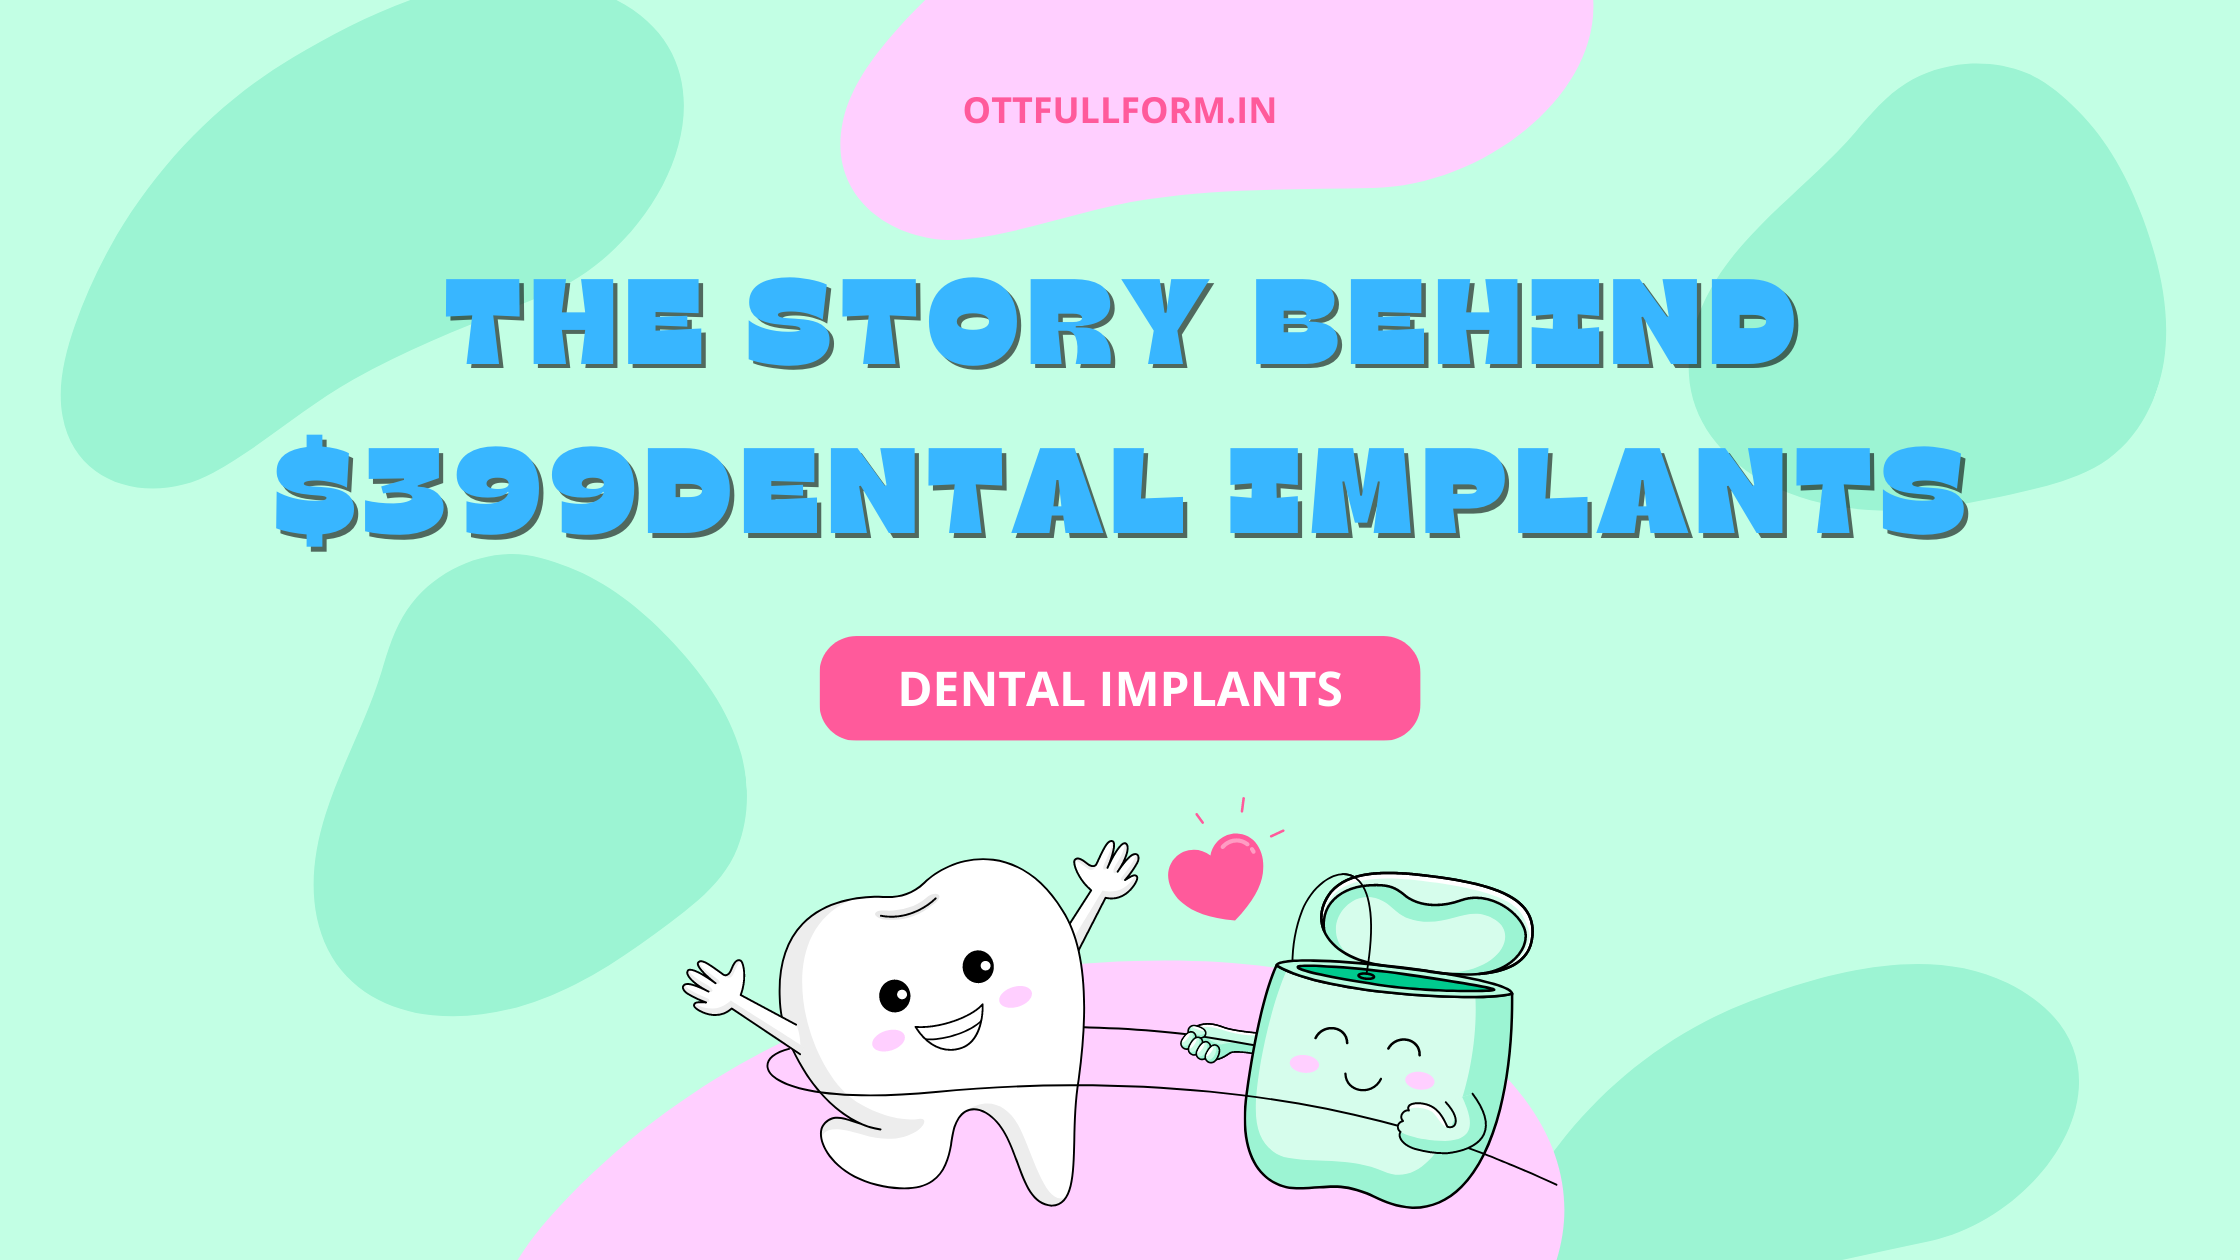 The Story Behind $399 Dental Implants